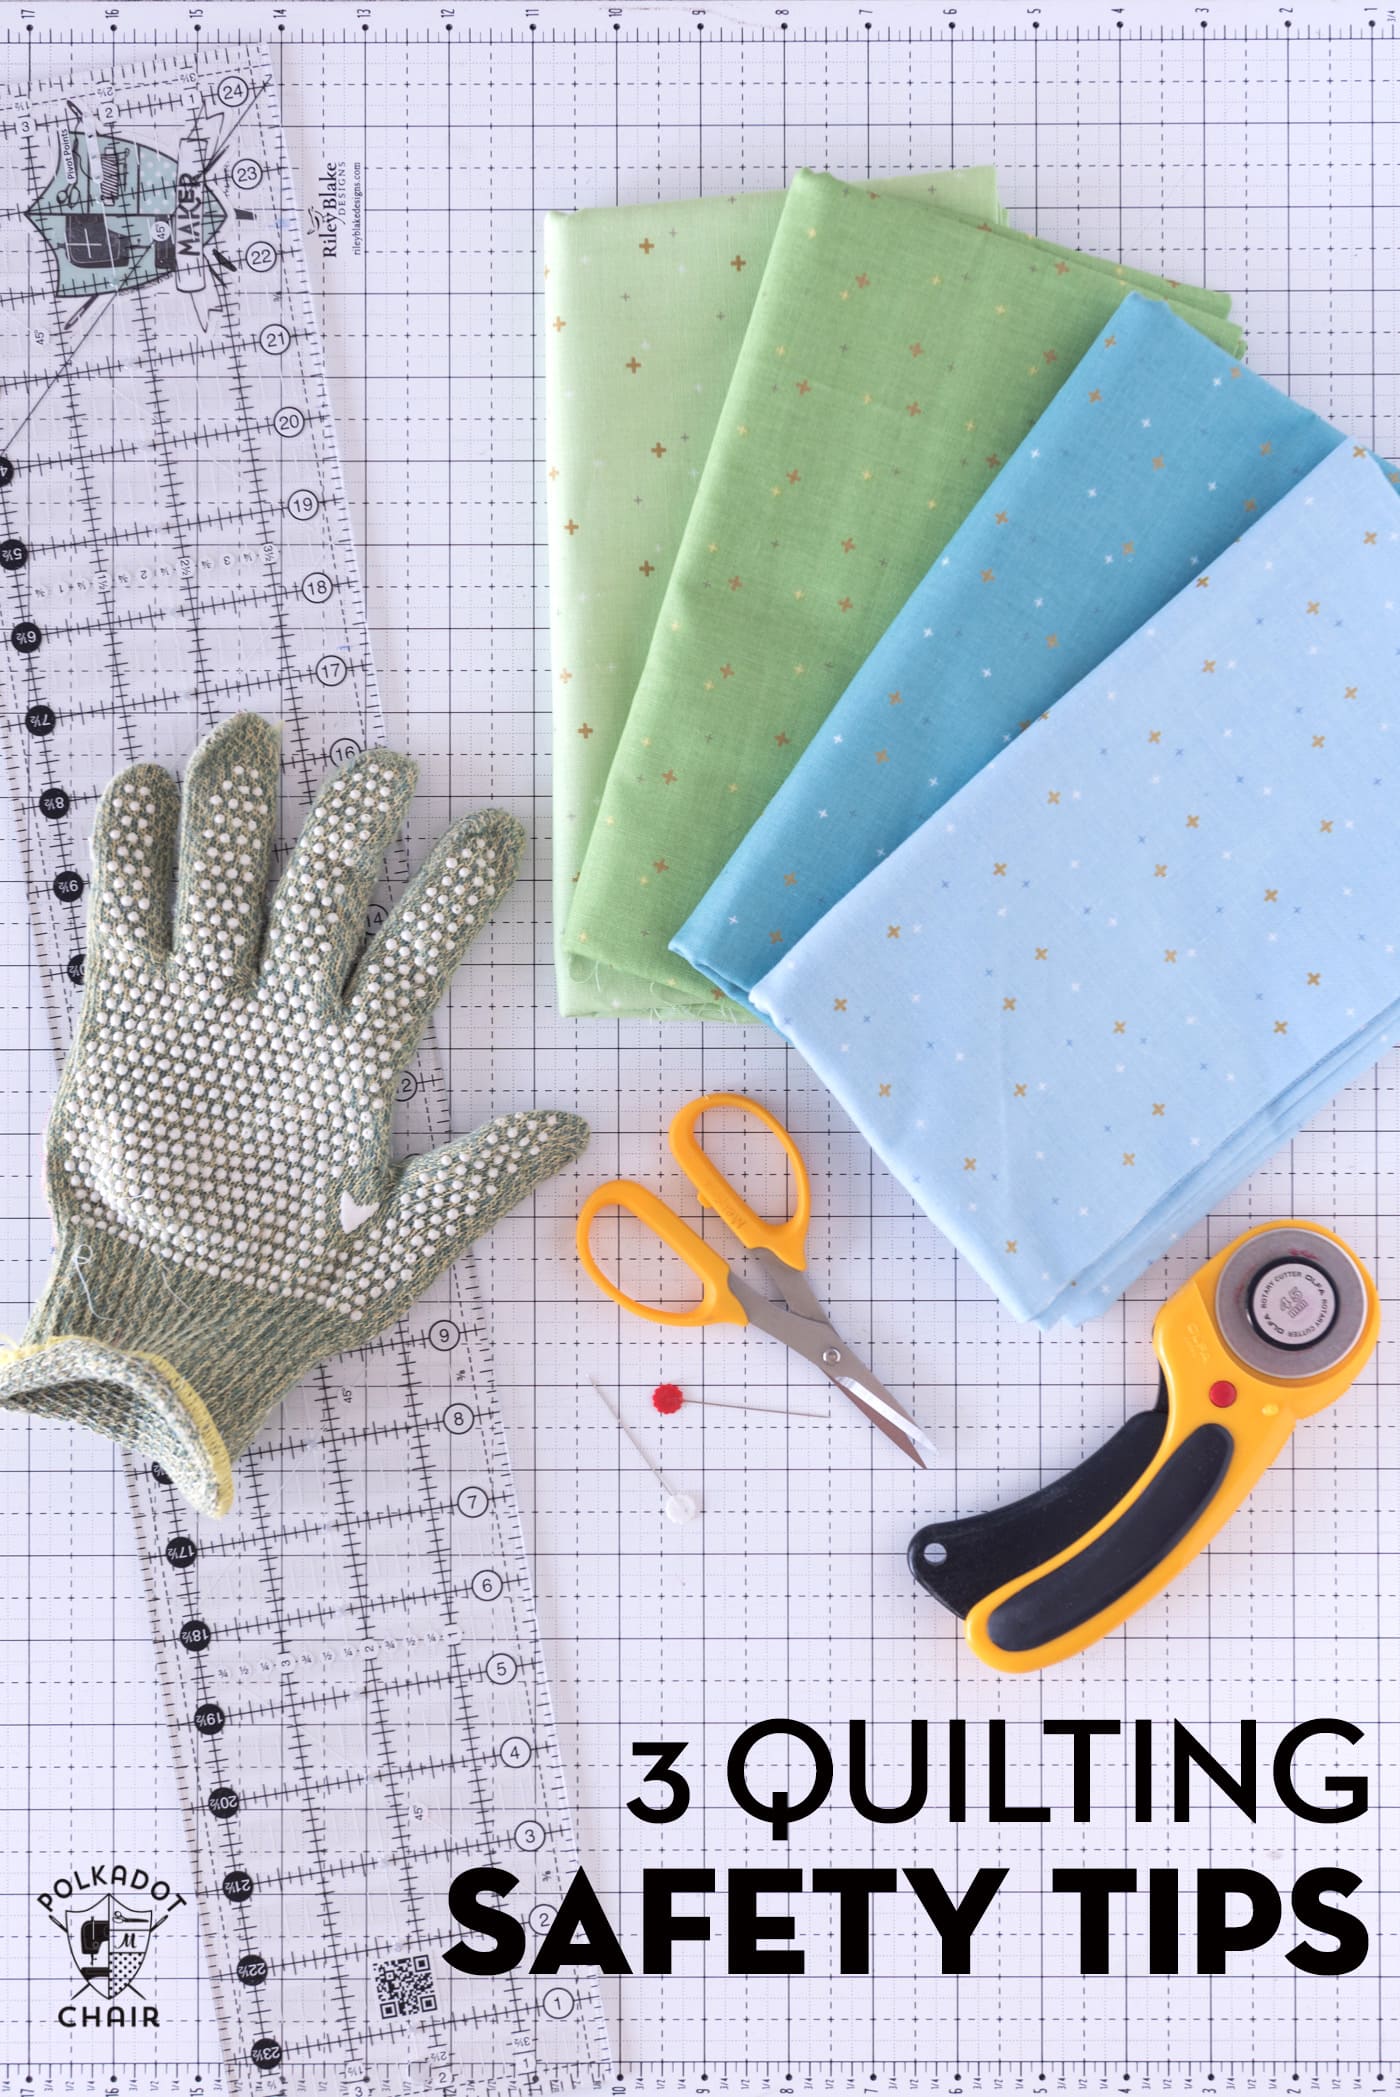 Do You Really Need Quilting Gloves? Quilting Demonstration and Money Saving  Tip! 